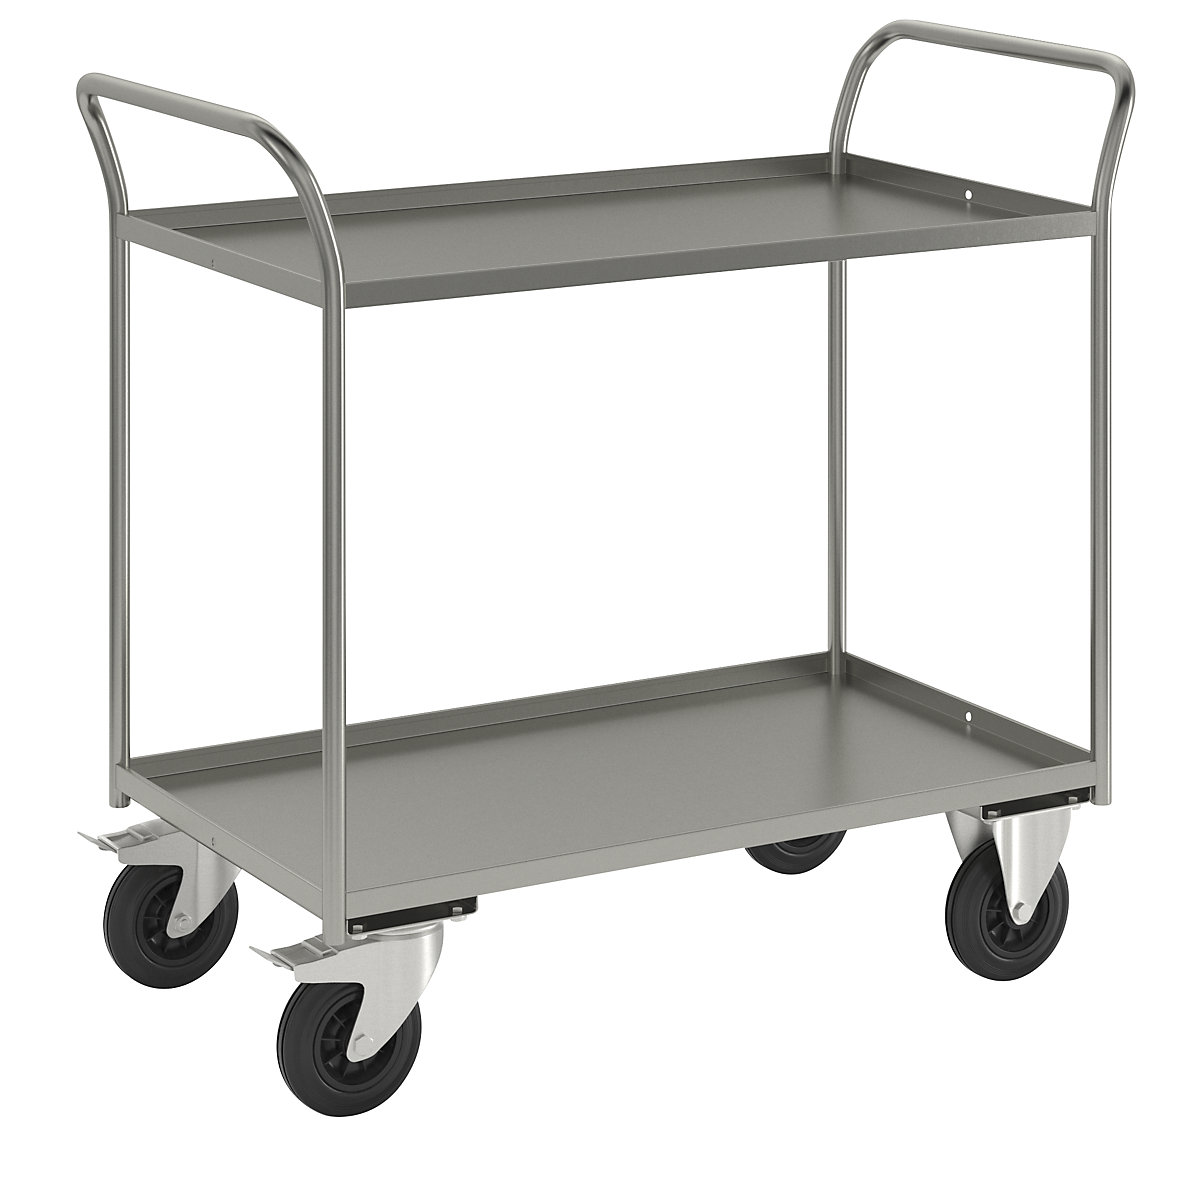 KM41 table trolley – Kongamek, 2 shelves with raised edges, LxWxH 1070 x 550 x 1000 mm, zinc plated, 2 swivel castors with stops, 2 fixed castors-6